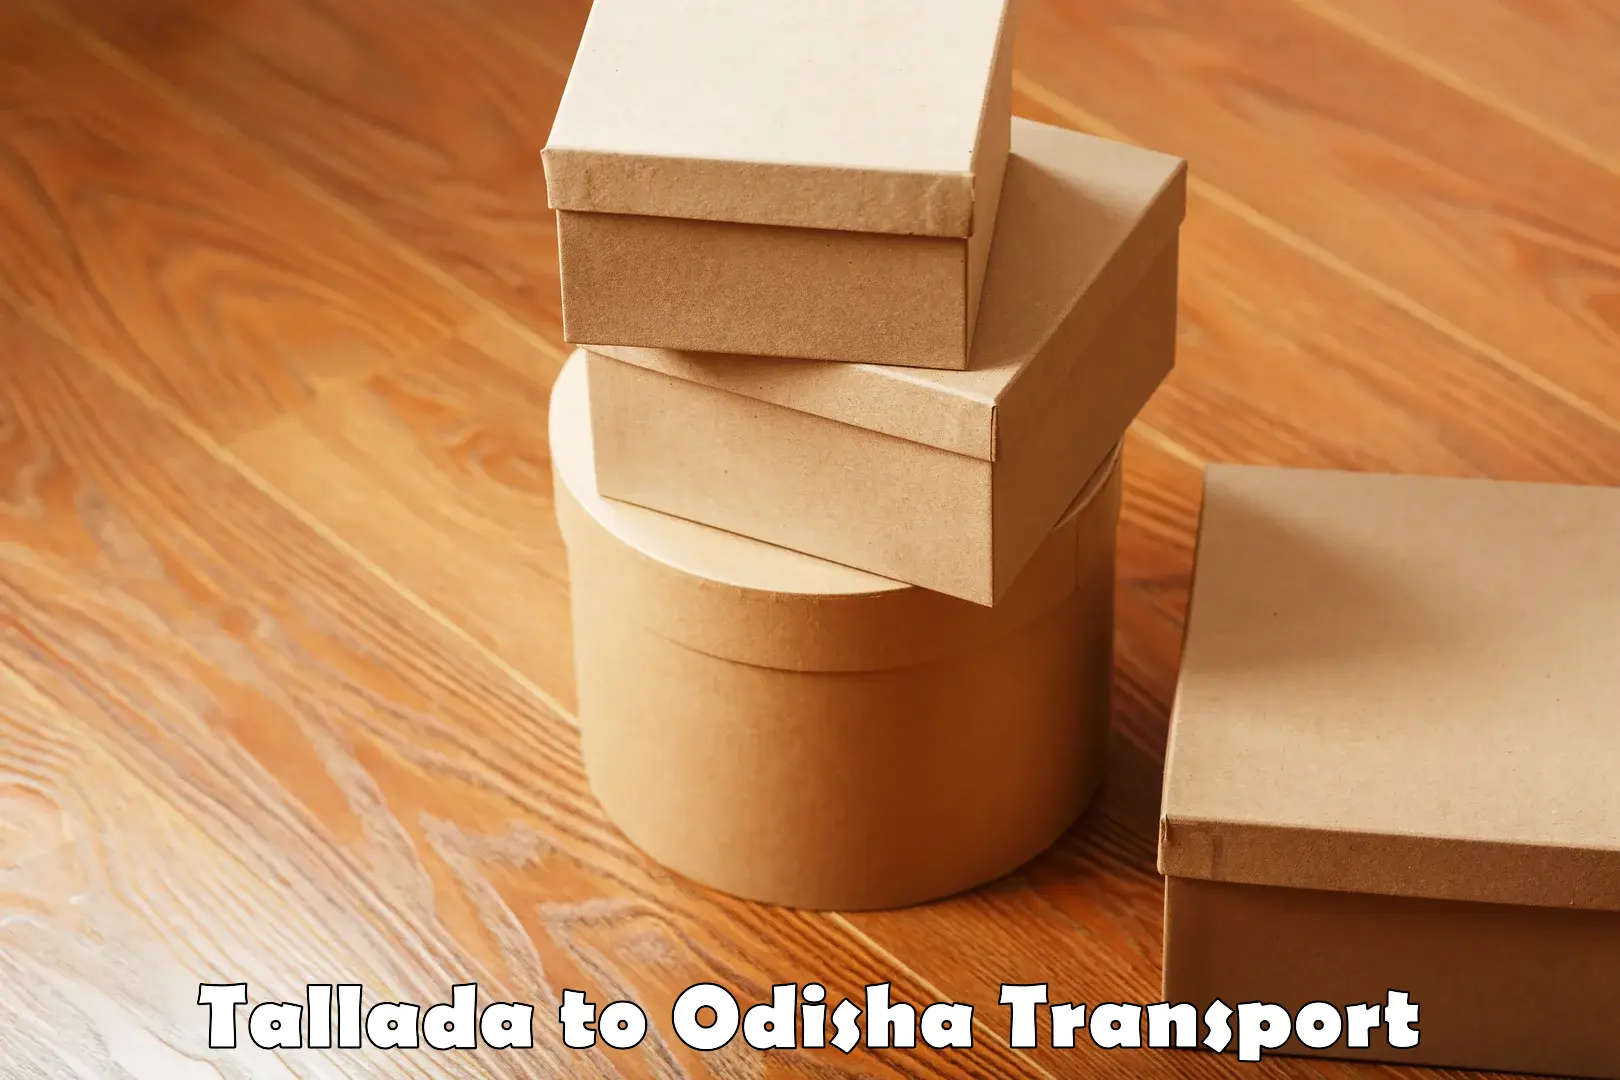 Transport shared services in Tallada to Galleri